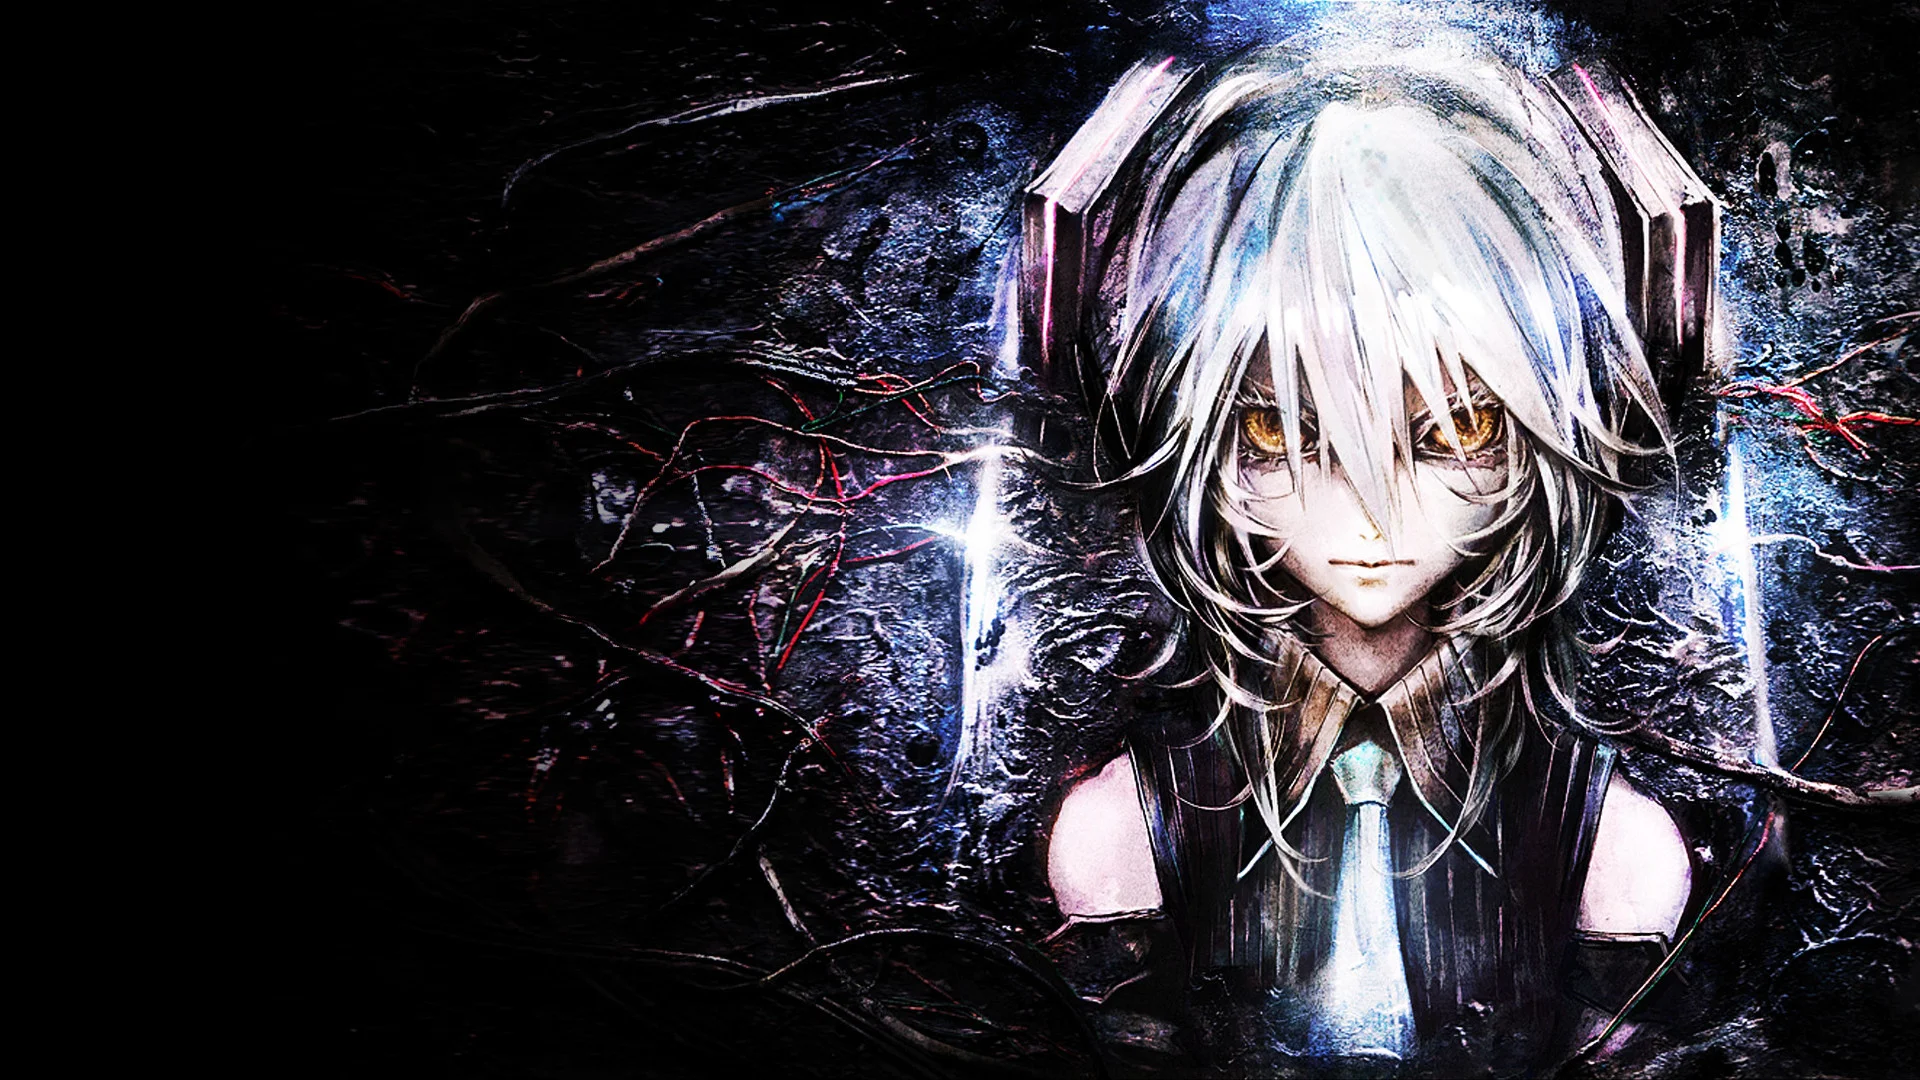 68 Hd Anime Wallpapers 1080p Images, Photos, Reviews